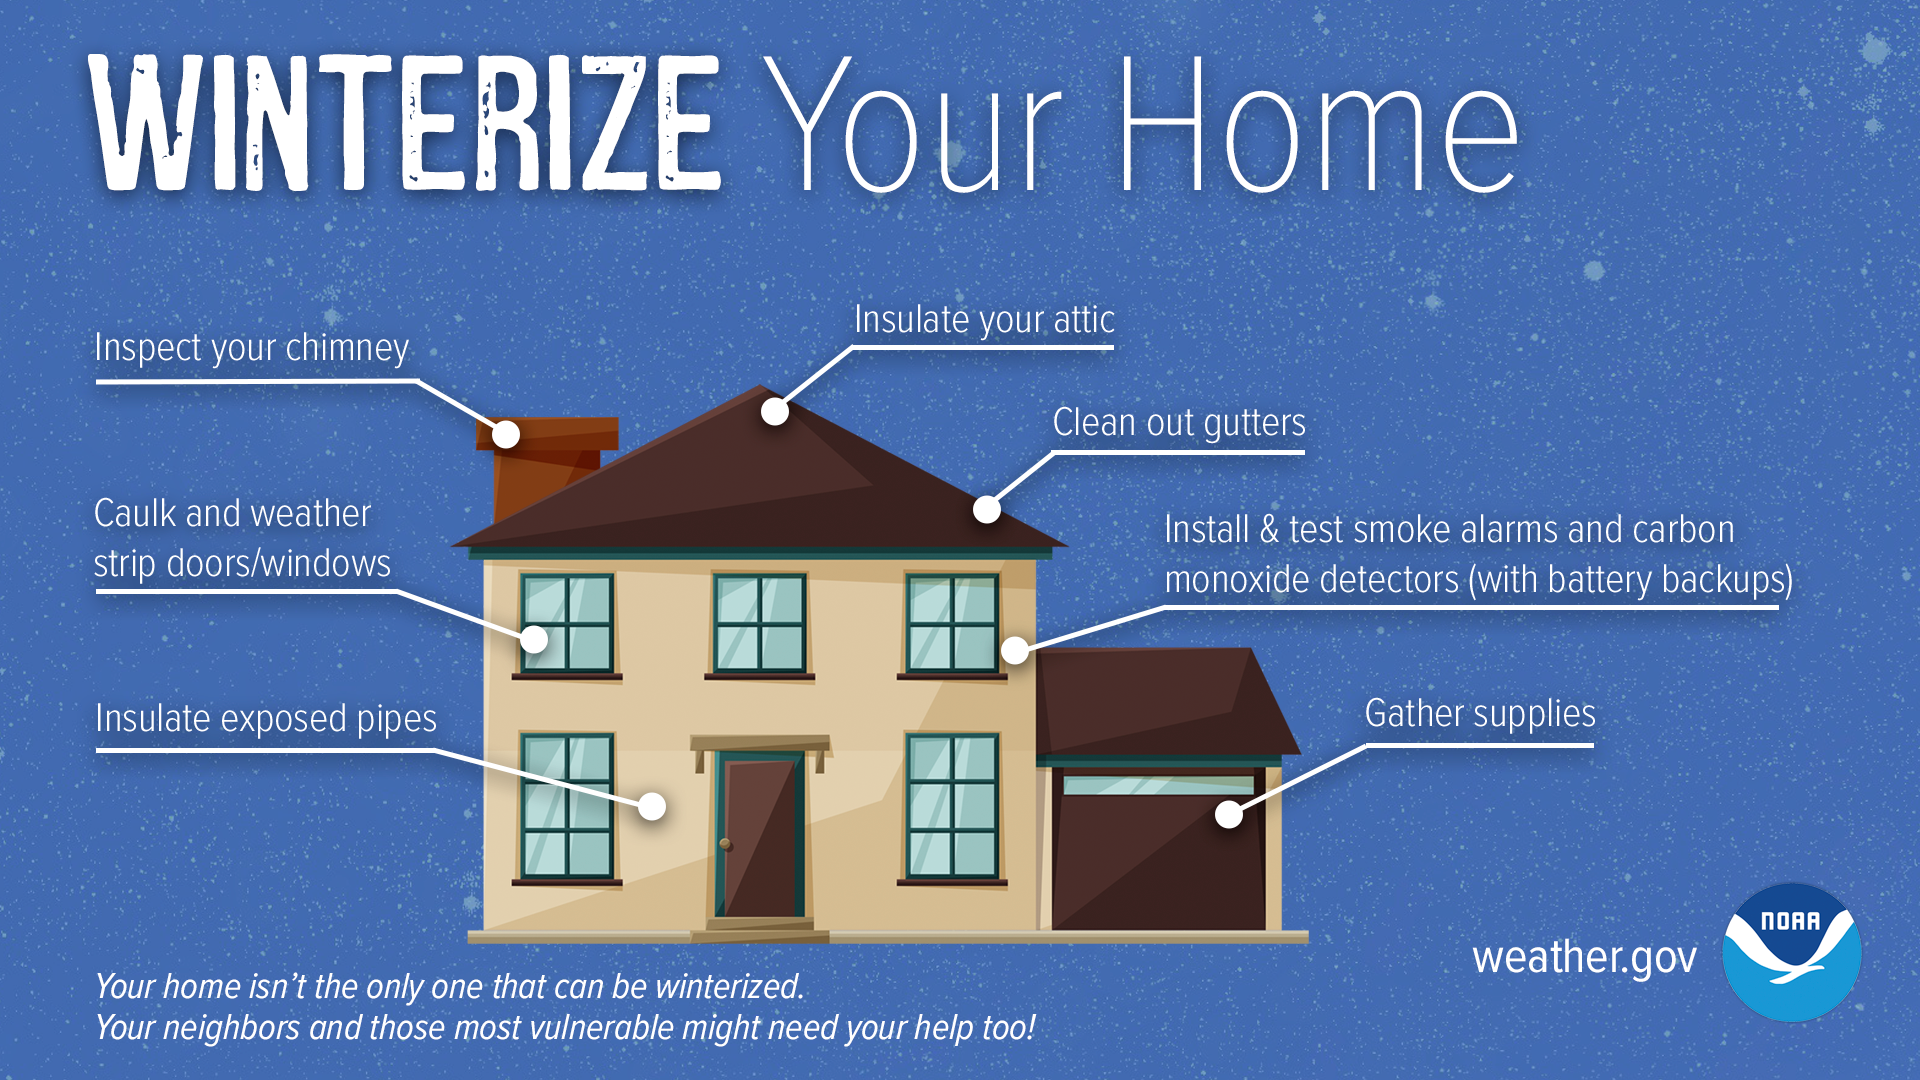 Winterize your home. Inspect your chimney. Caulk and weather strip doors/windows. Insulate exposed pipes. Insulate your attic. Clean out gutters. Install and test smoke alarms and carbon monoxide detectors (with battery backups). Gather supplies.